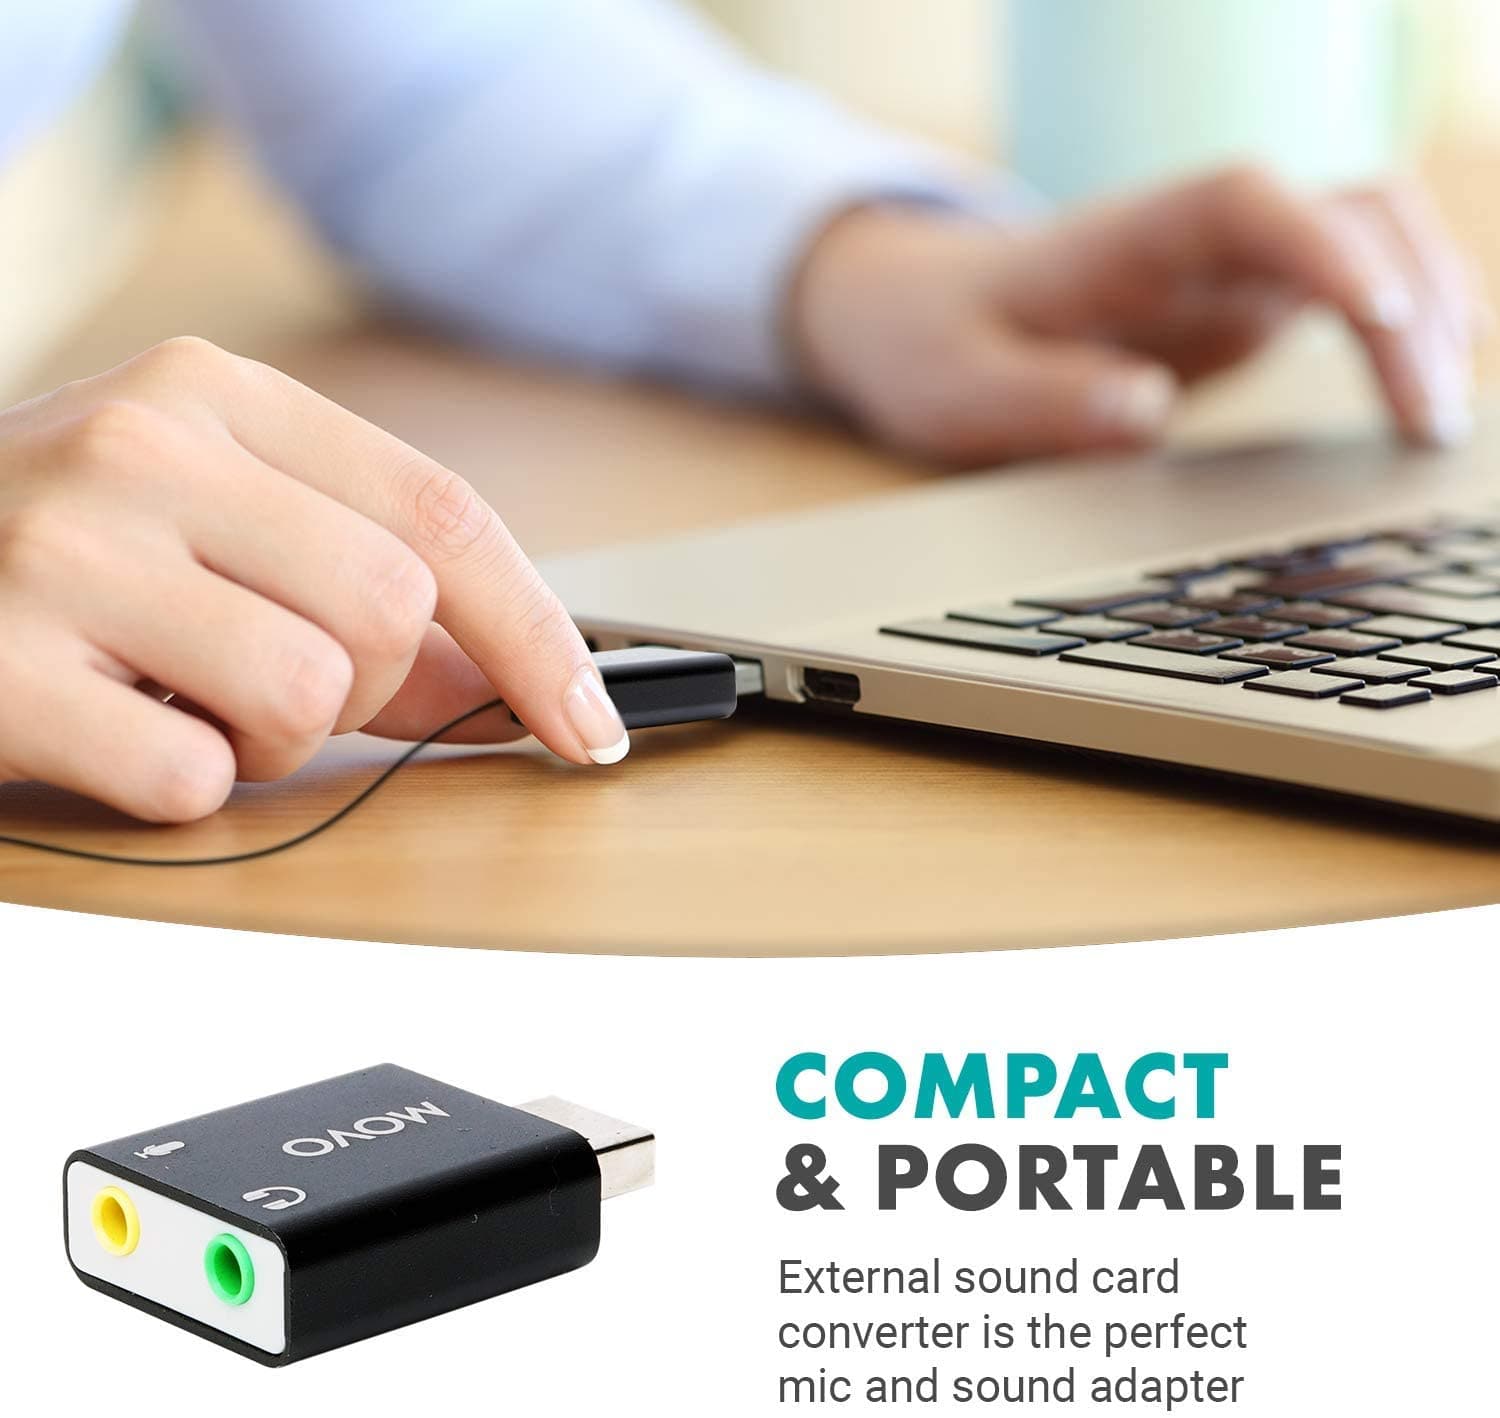 USB-AC, External USB Stereo Sound Card Adapter for PC & Mac